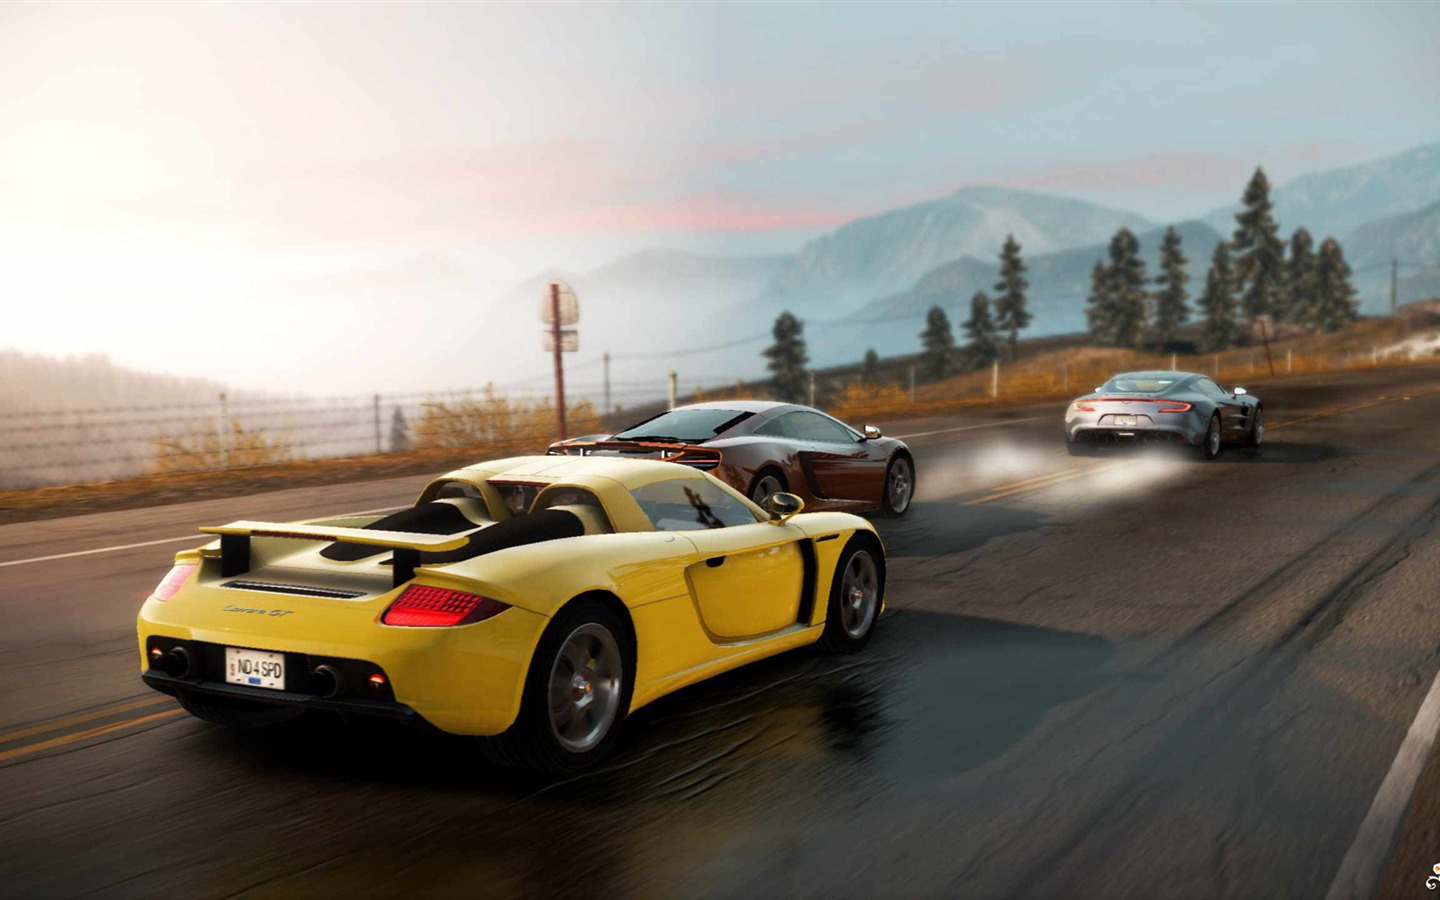 Need for Speed: Hot Pursuit 極品飛車14：熱力追踪 #6 - 1440x900